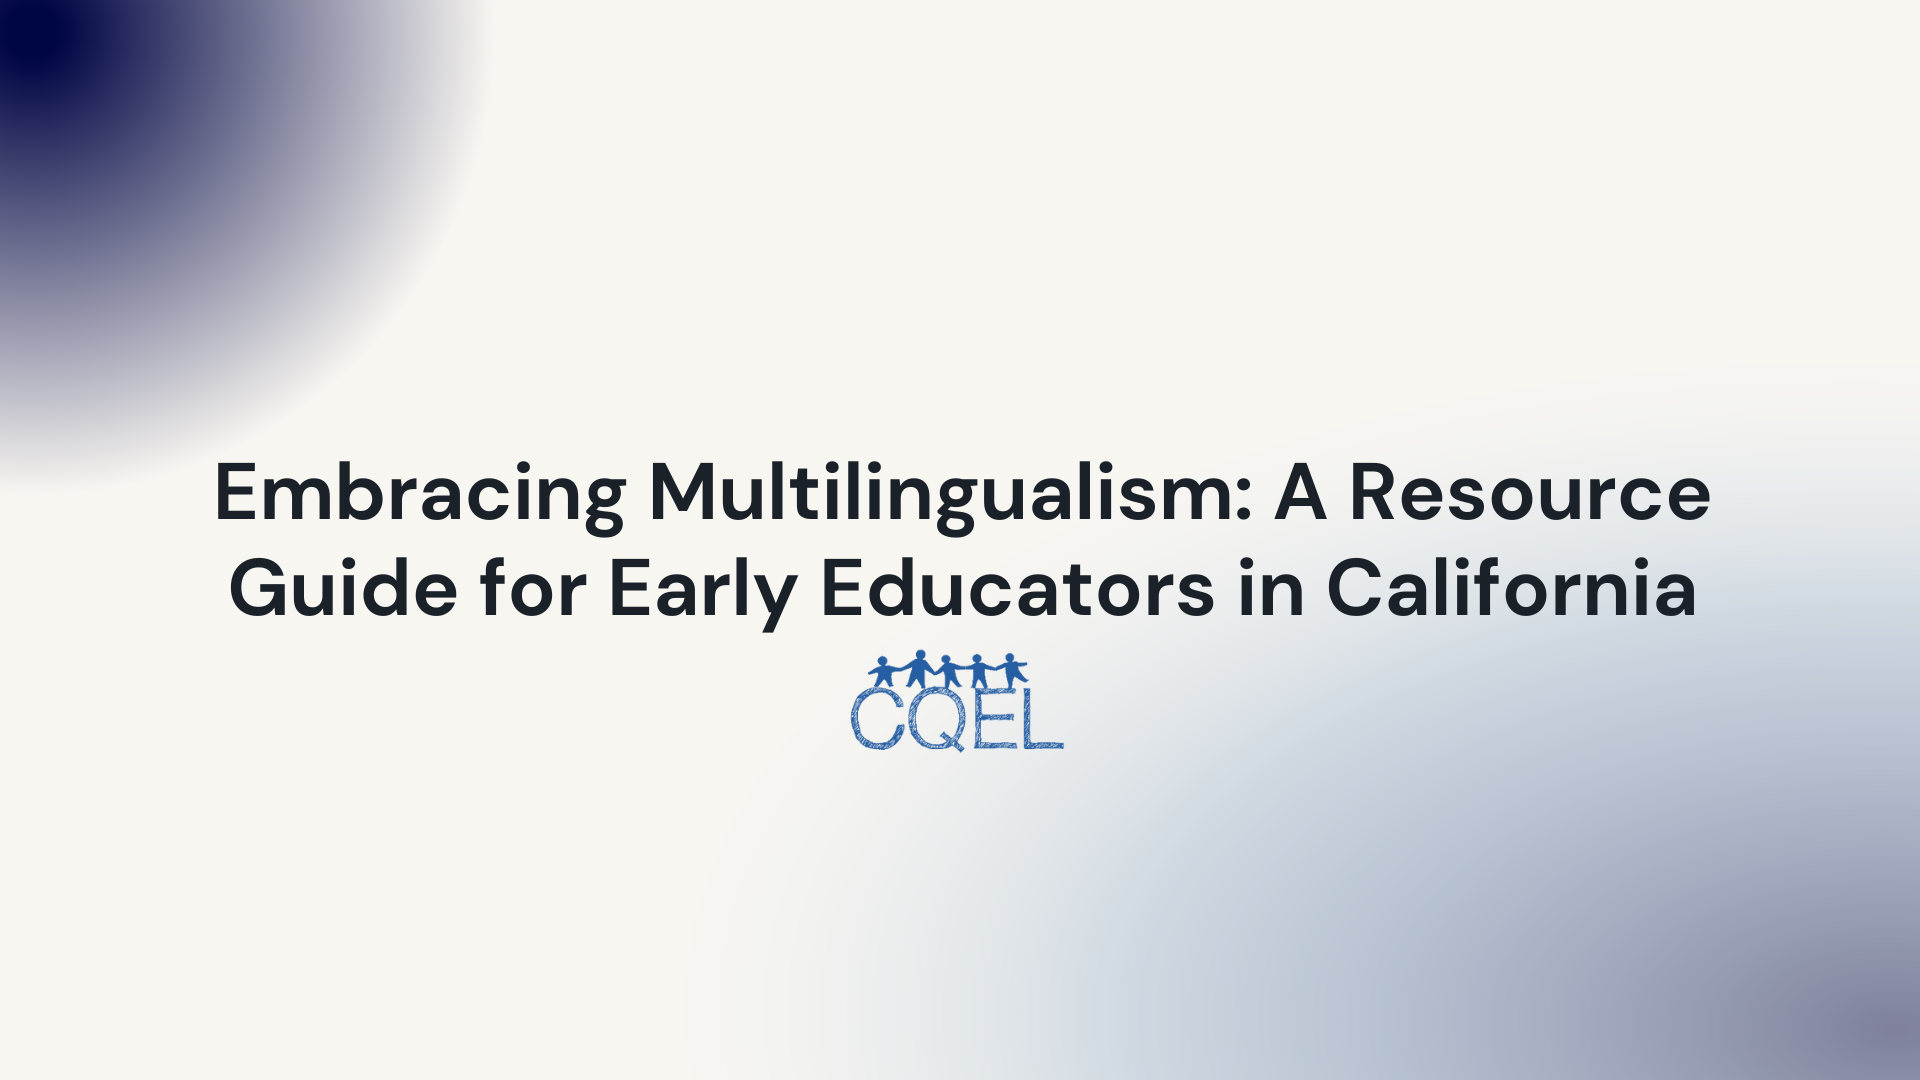 Embracing Multilingualism: A Resource Guide for Early Educators in California